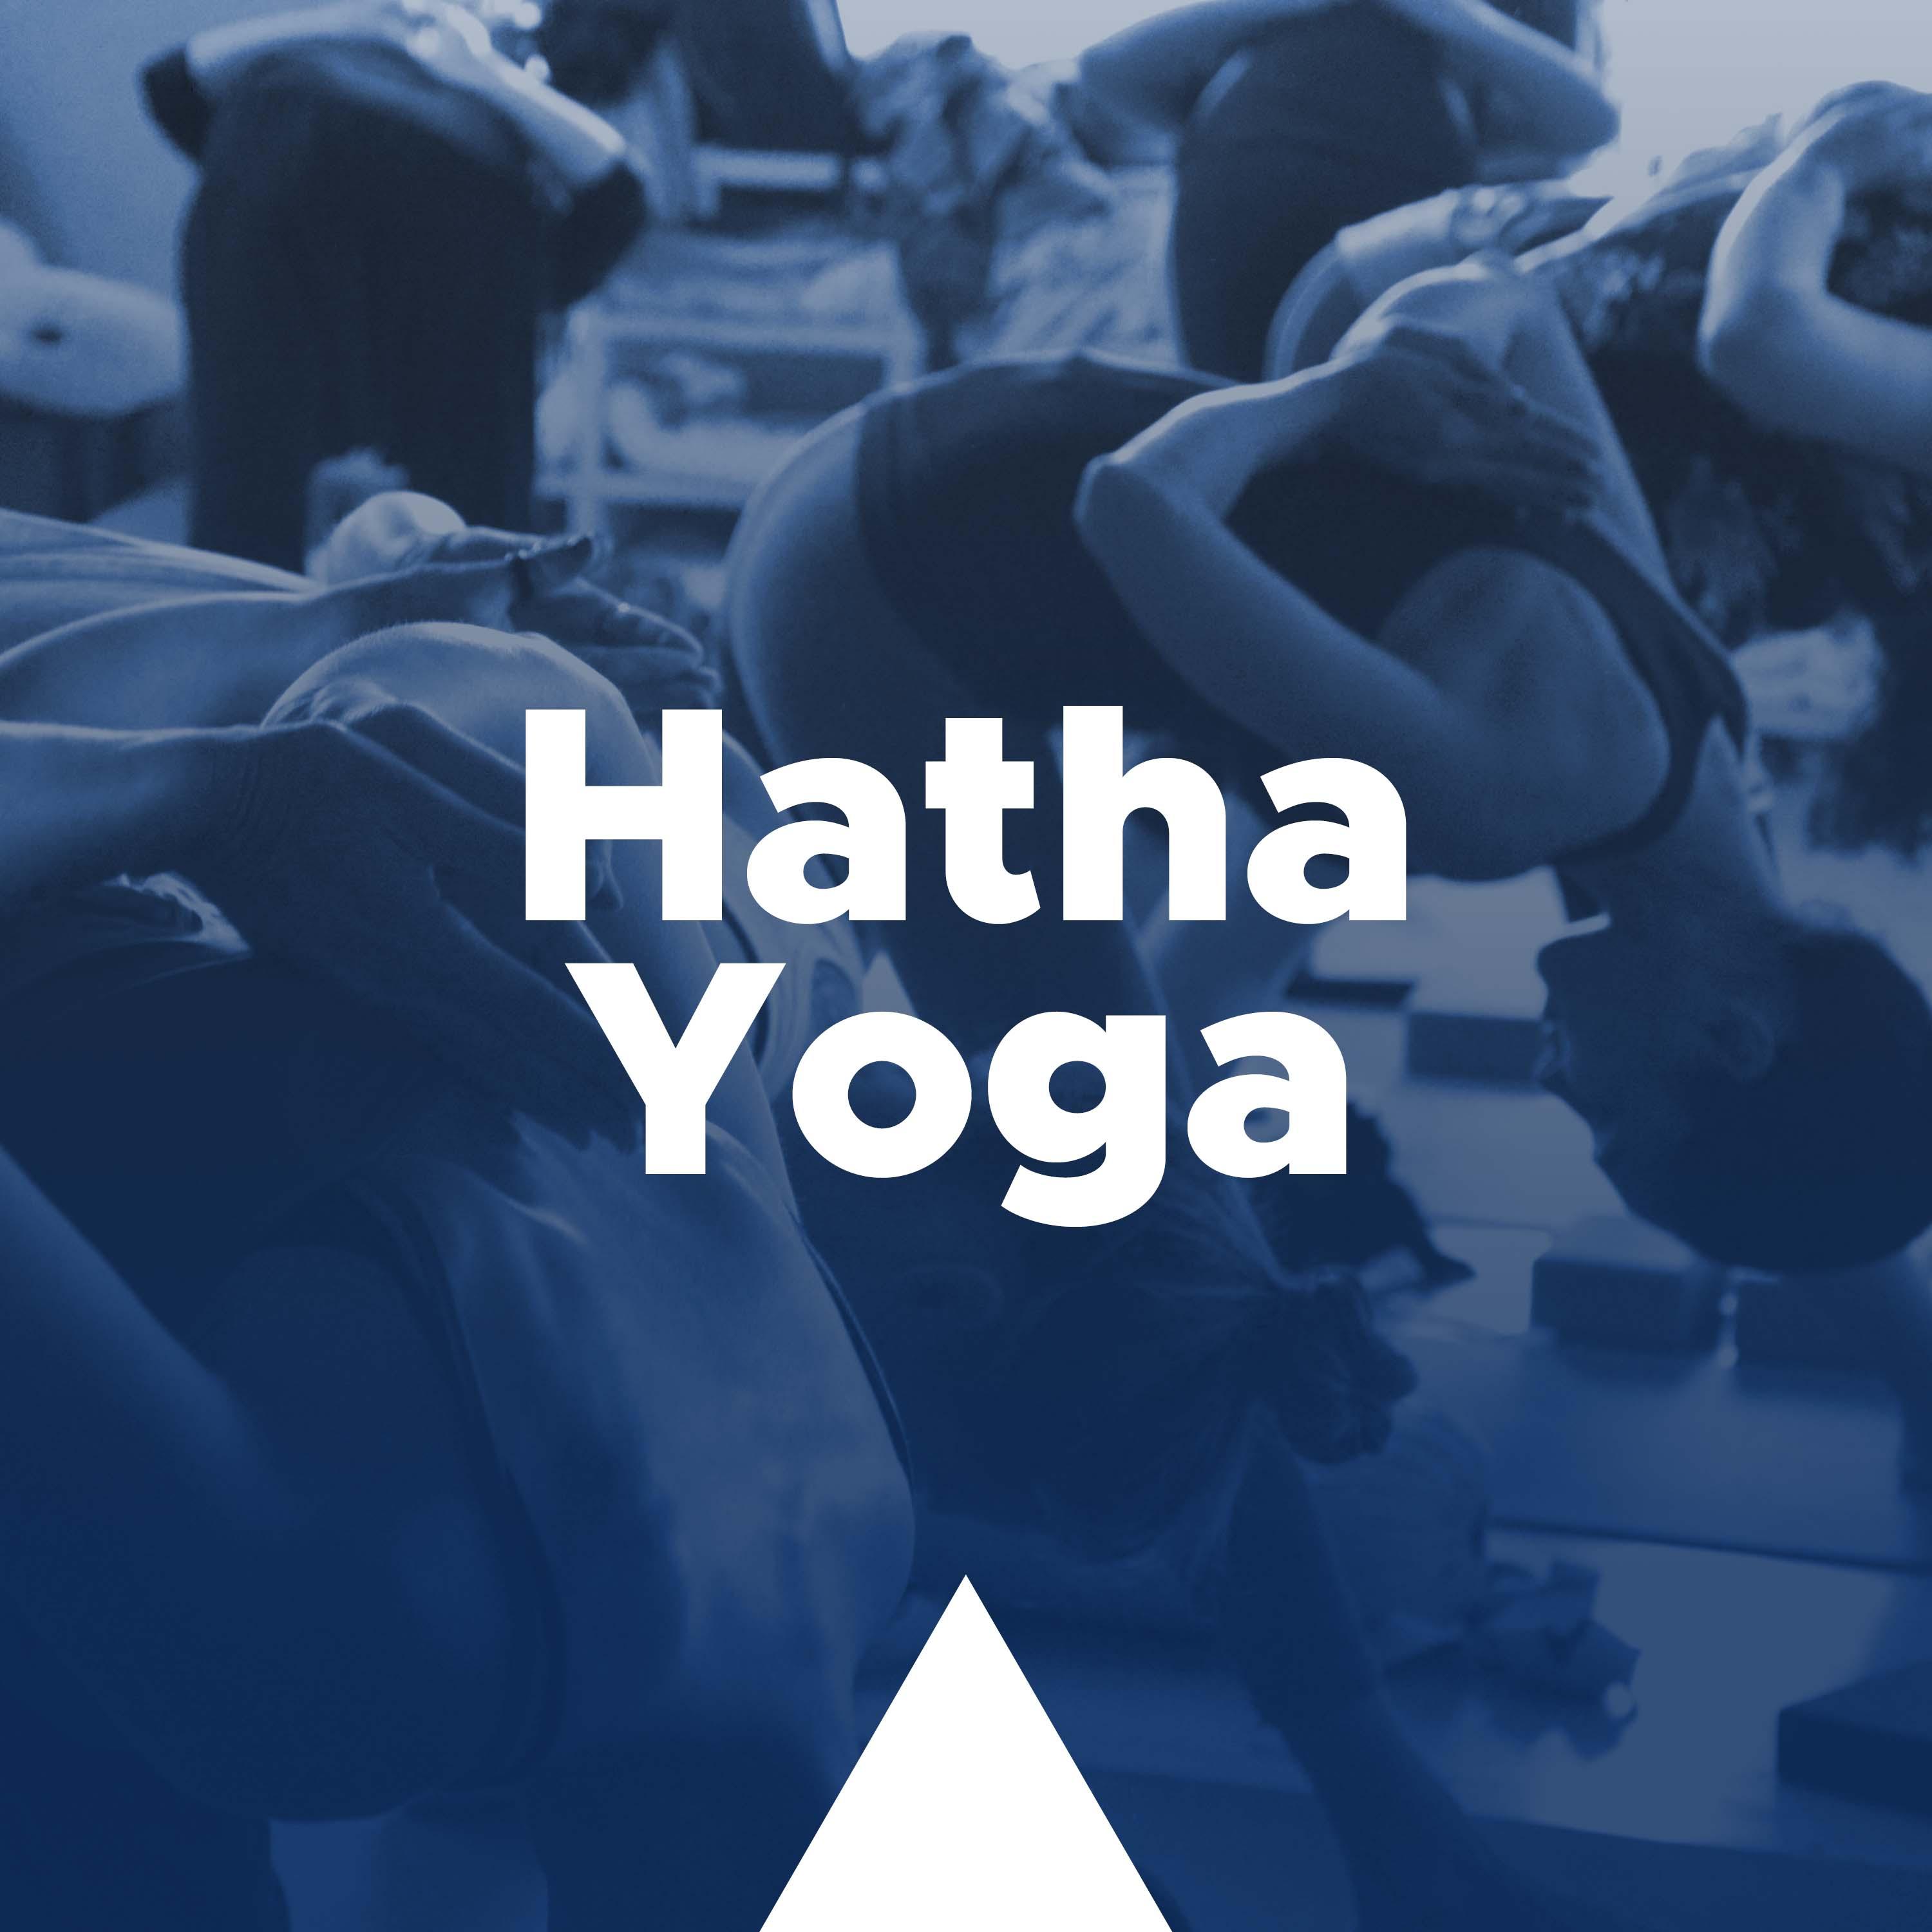 Hatha Yoga - Instrumental Music with Nature Sounds